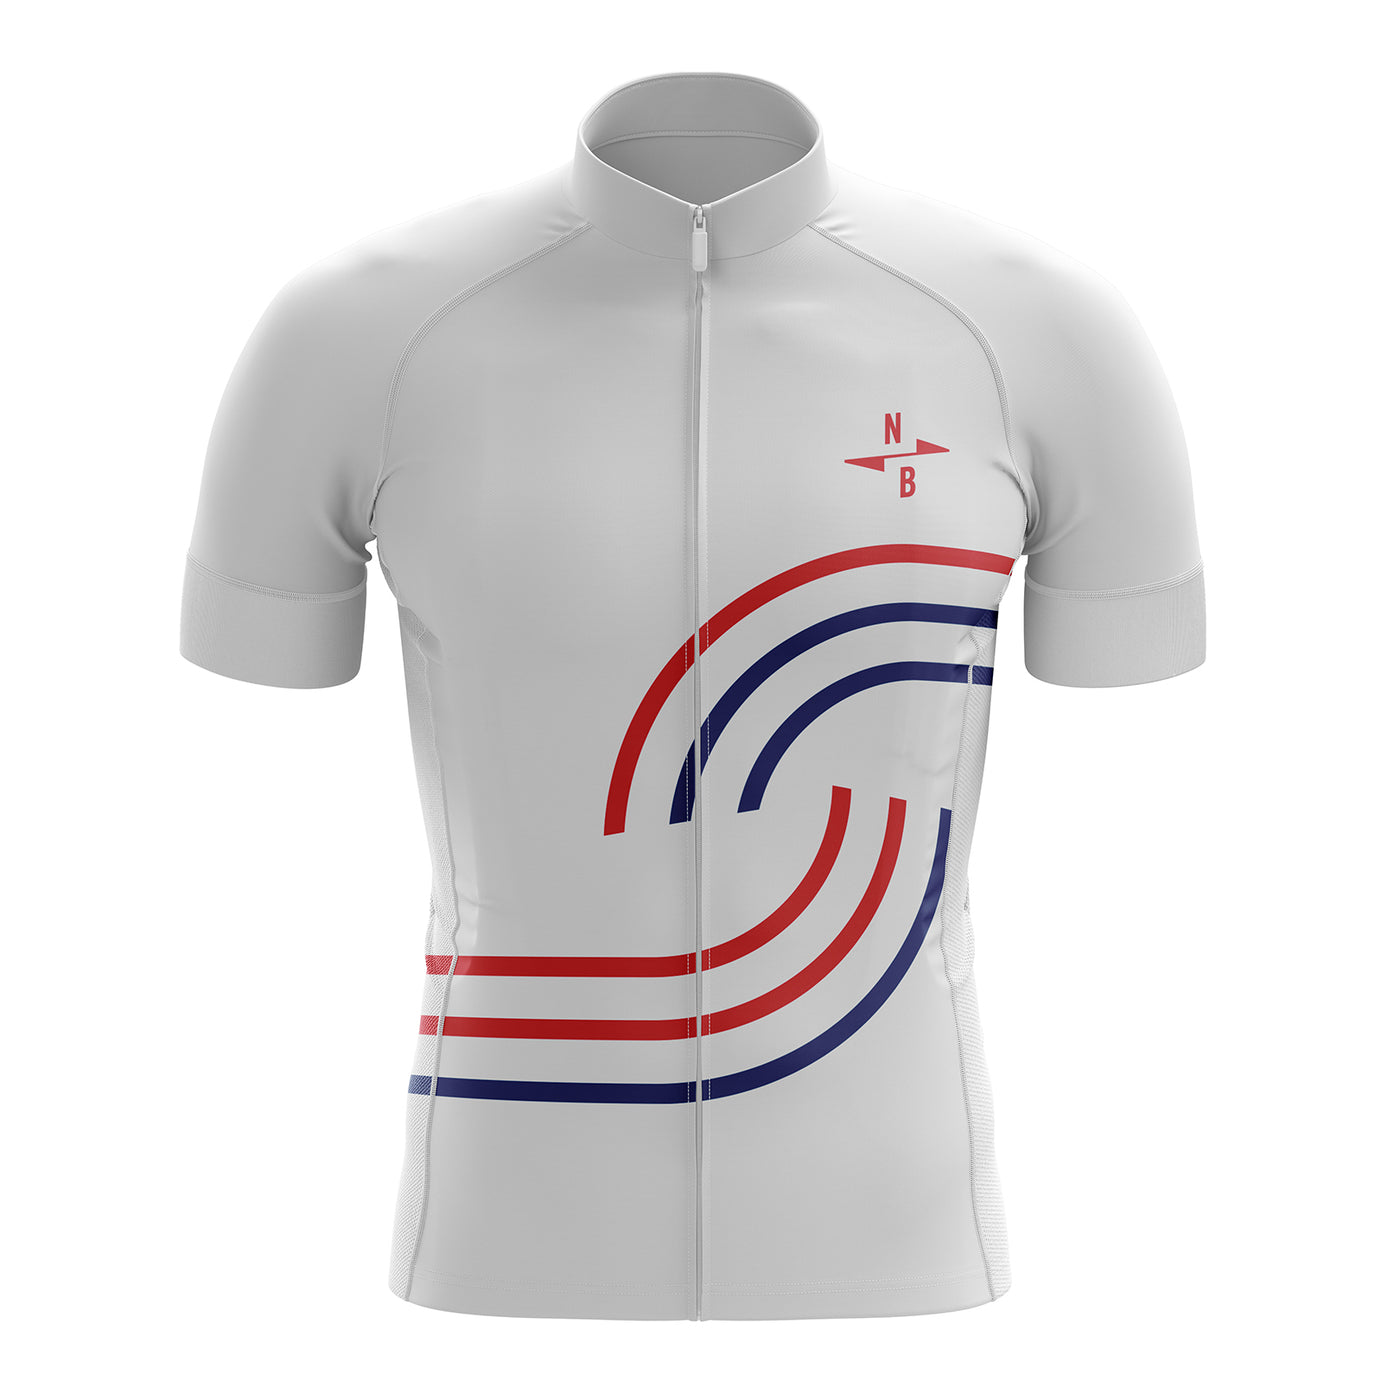 North Brewing Co Springwell Cycling Jersey